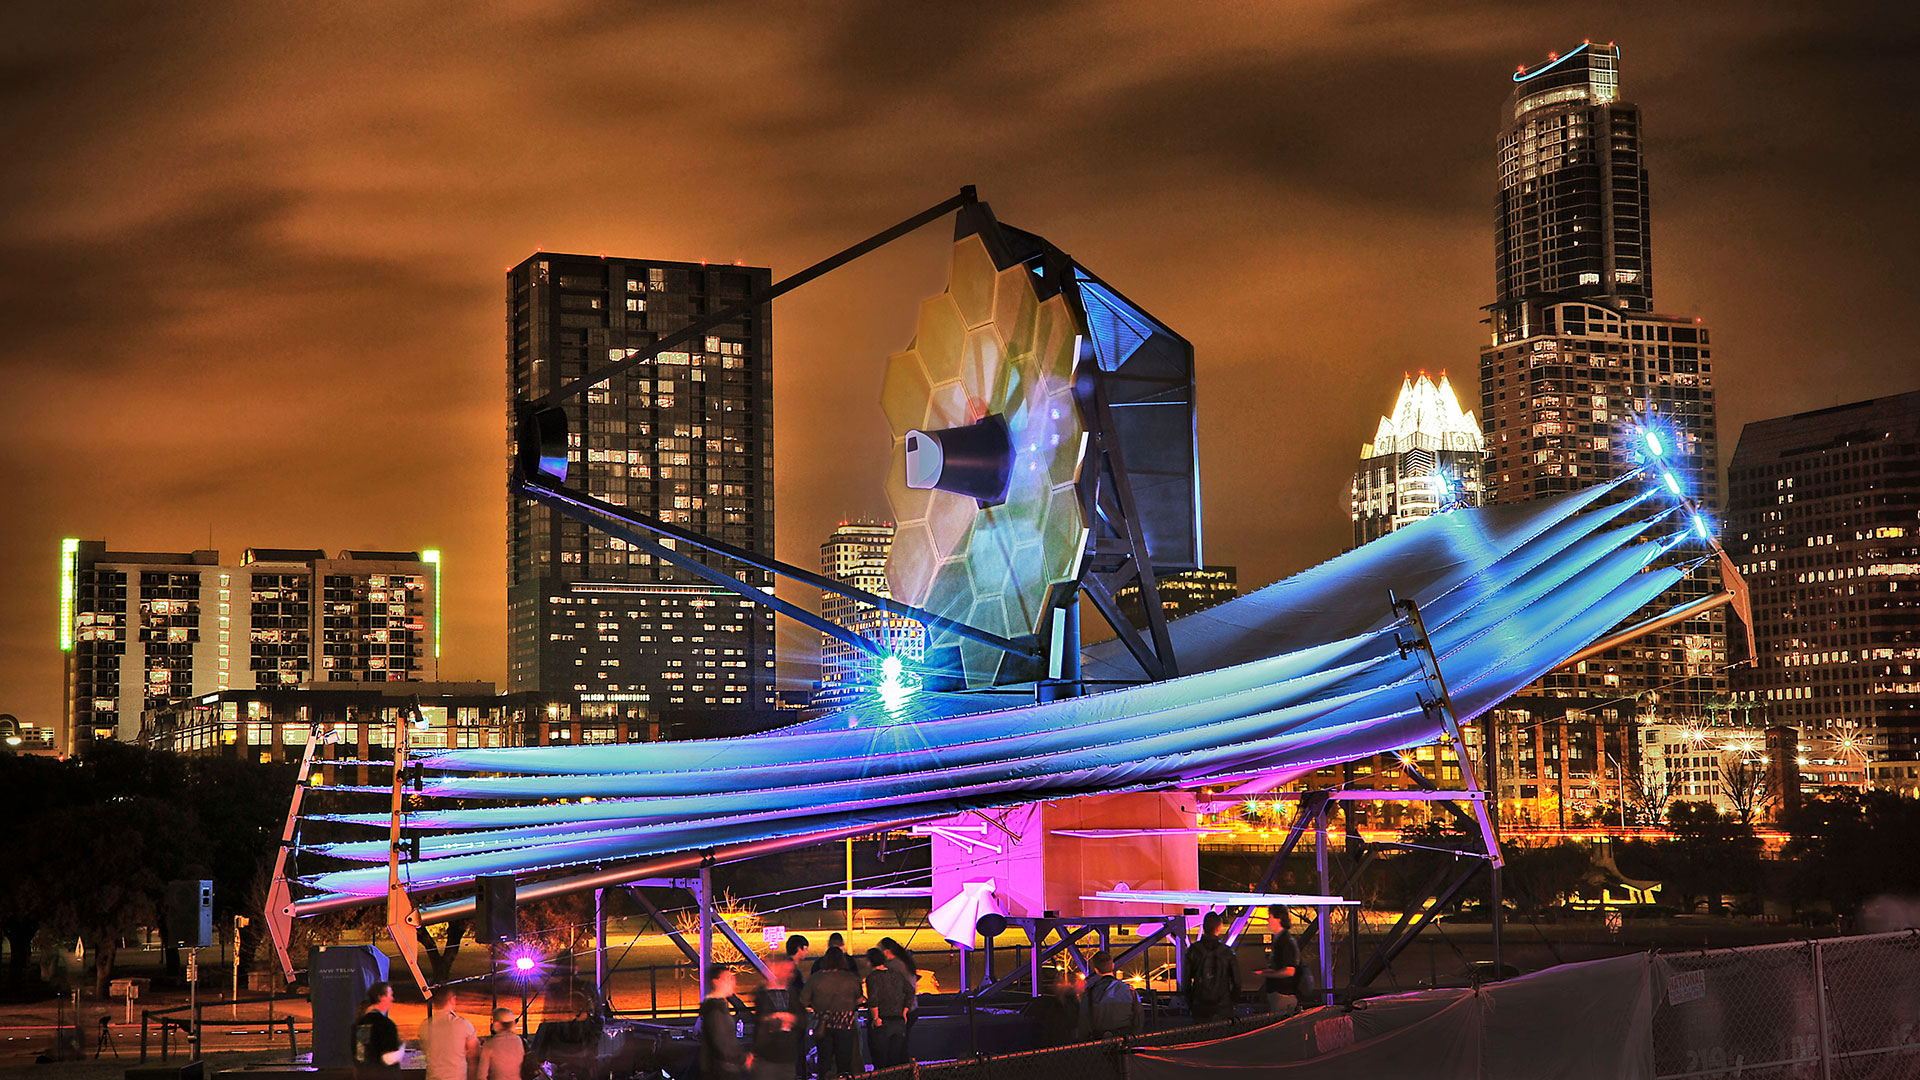 a full-size model of the james webb space telescope is seen in austin, texas, with the night sky and a few buildings in the background